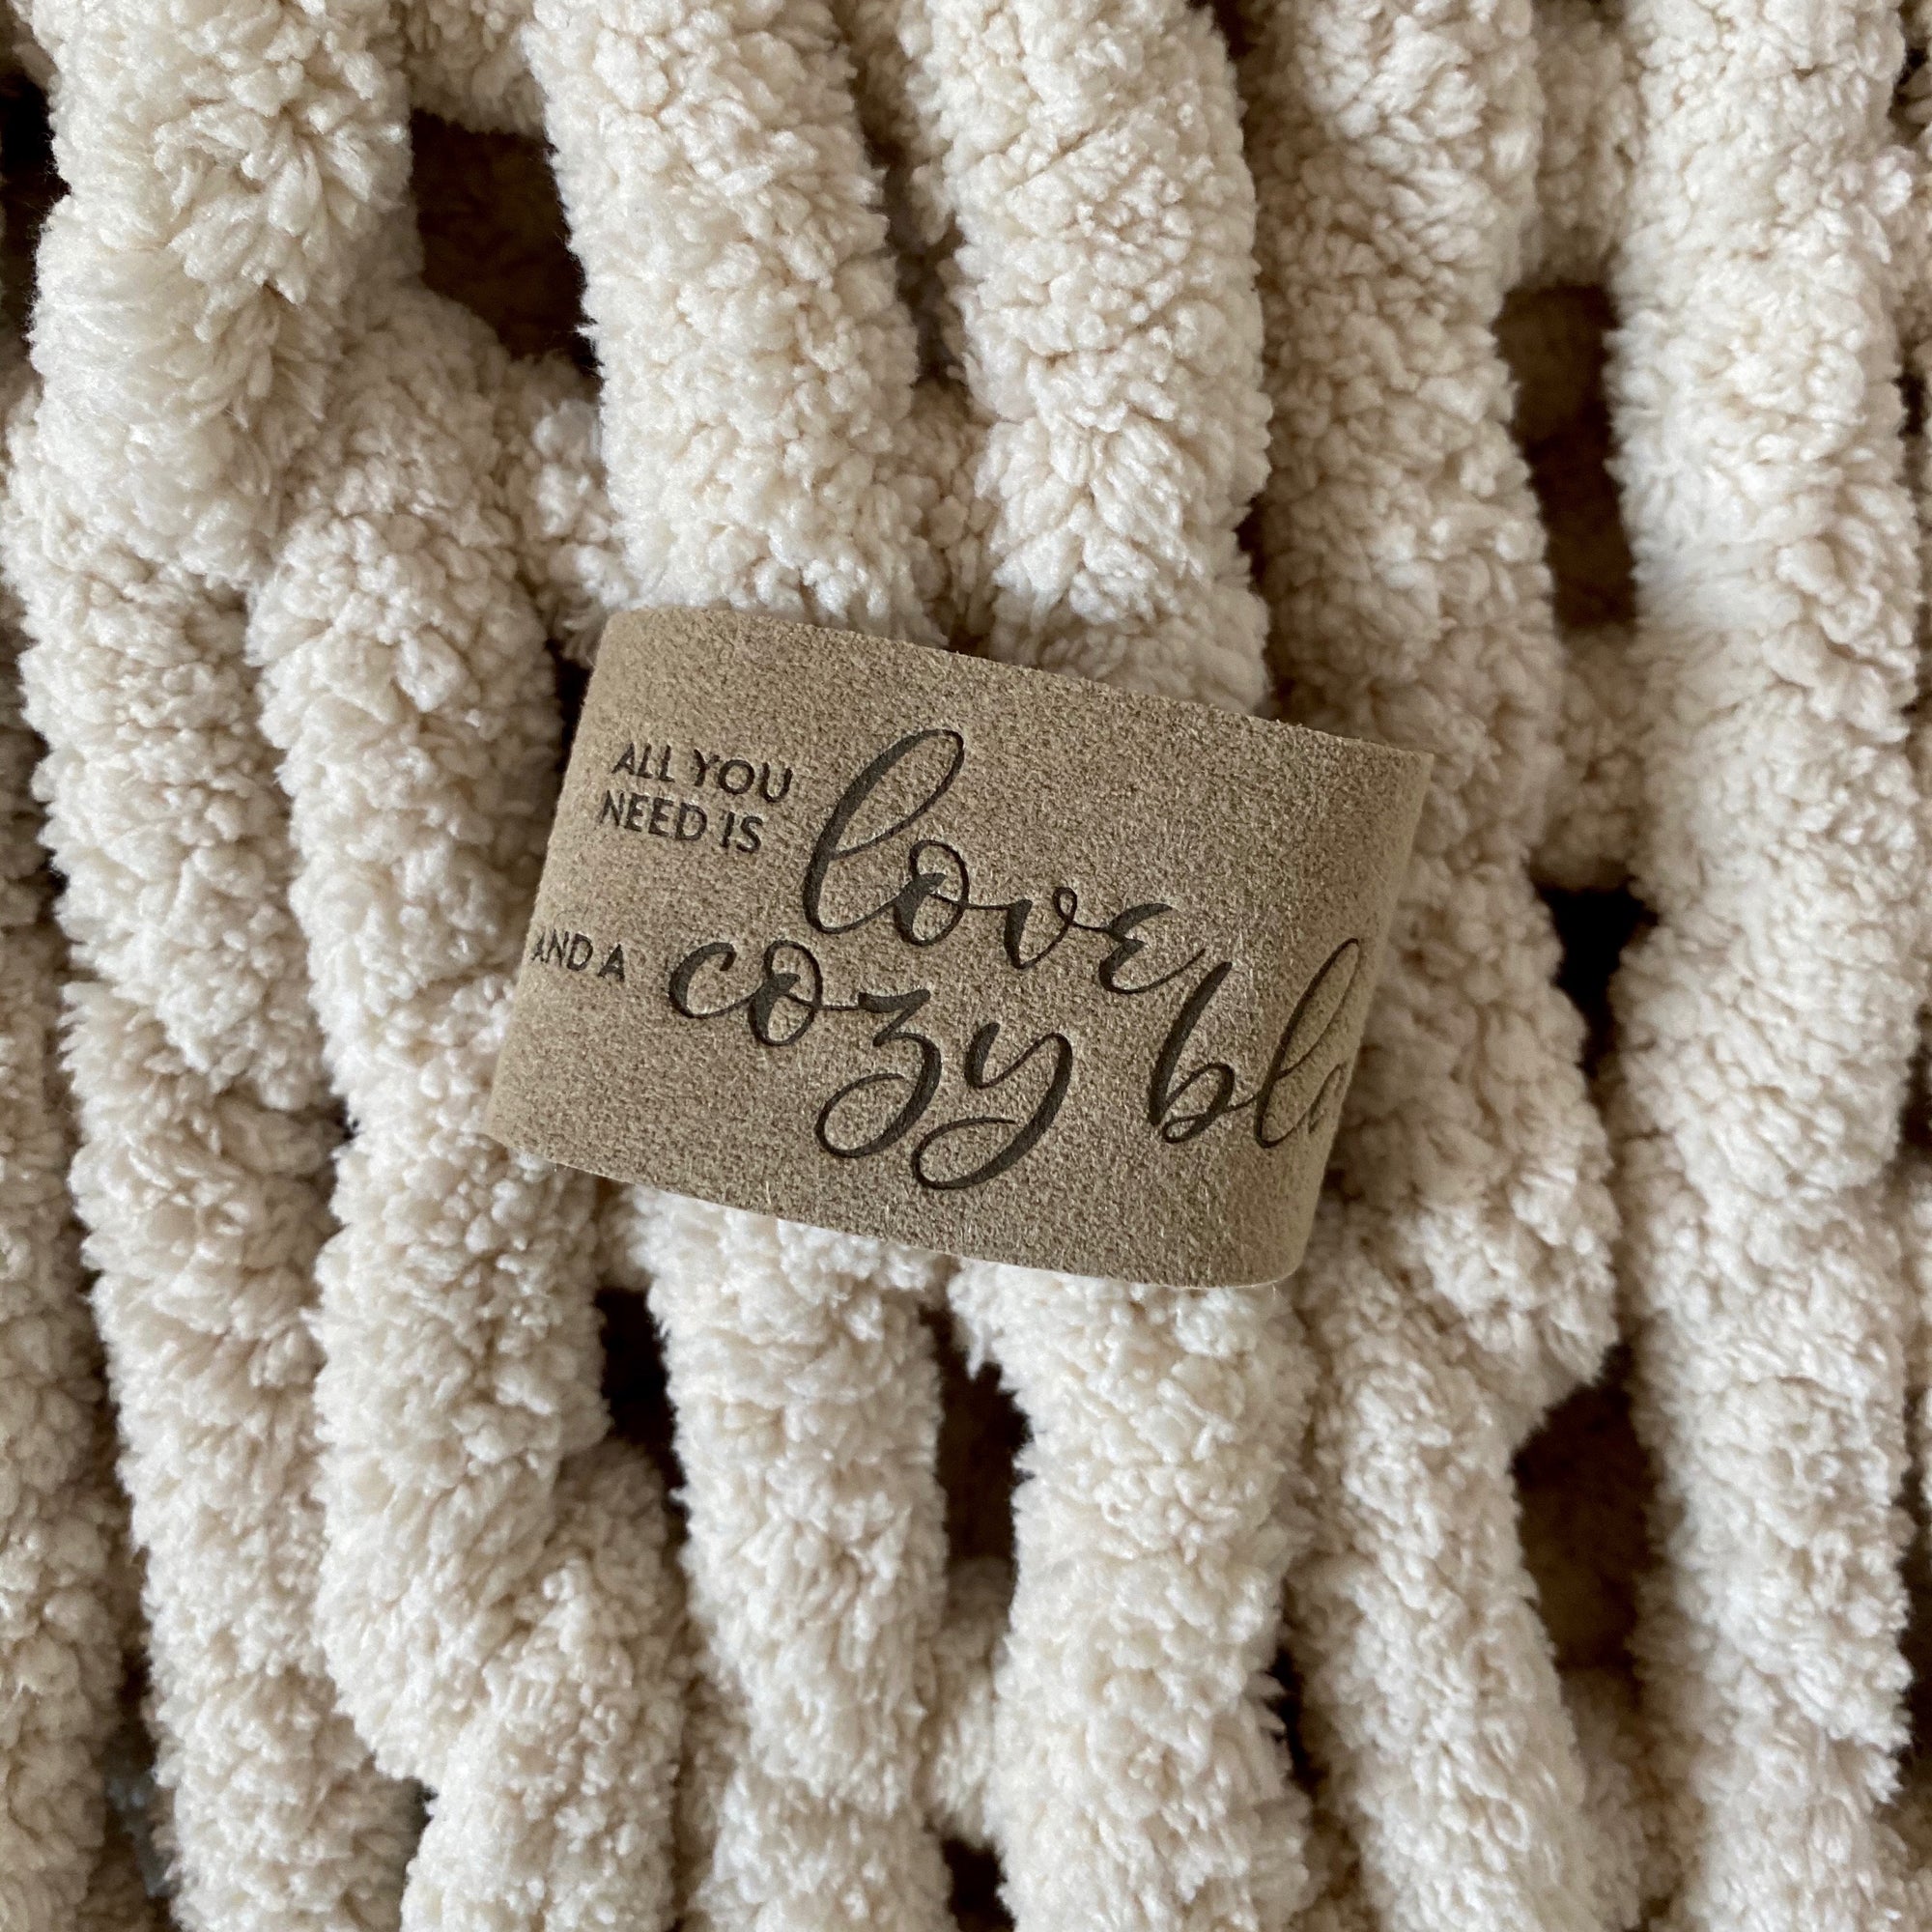 "All you need is love and a cozy blanket." LoveSnap on Infinite Love Blanket in Oat